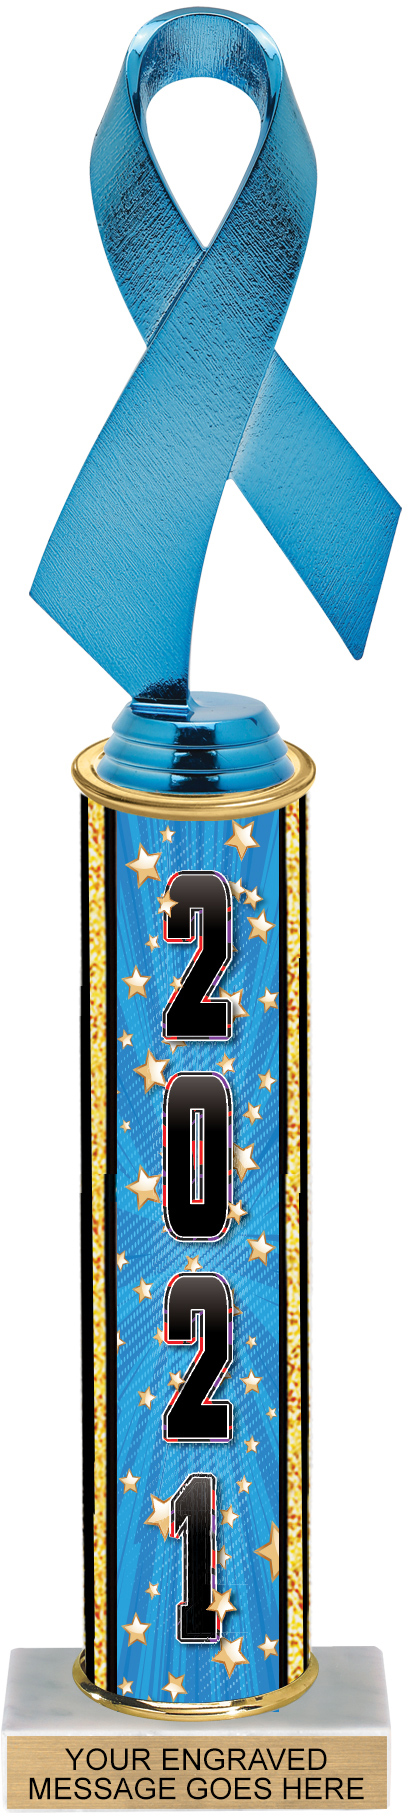 Comic Stars Column Trophy with Year - 14 inch